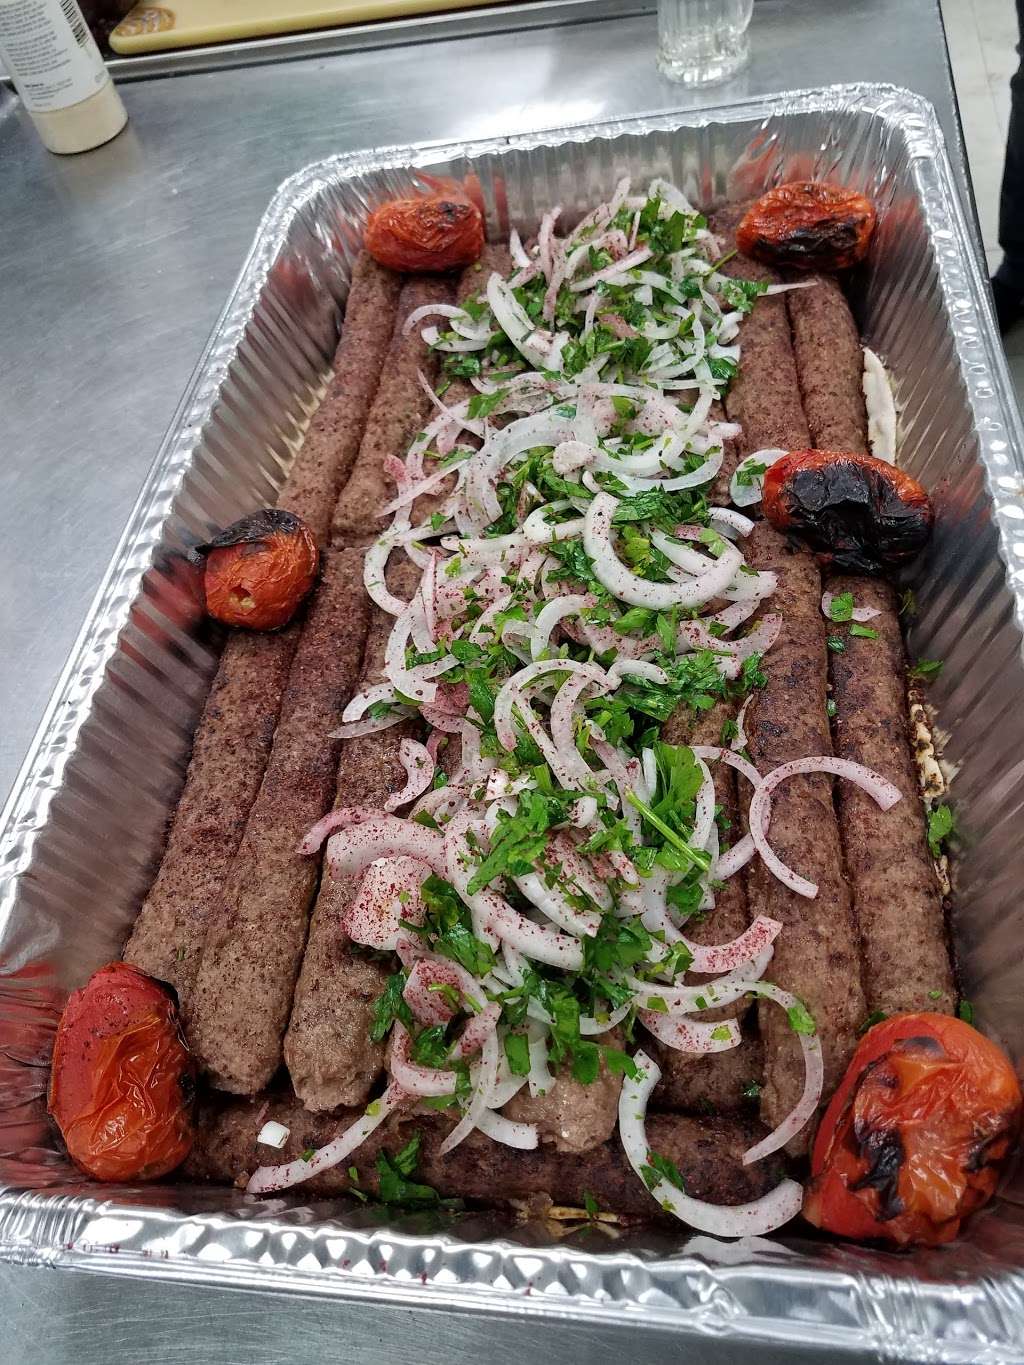 Nineveh Grocery & Meat | 2850 W Devon Ave, Chicago, IL 60659, USA | Phone: (773) 338-0690